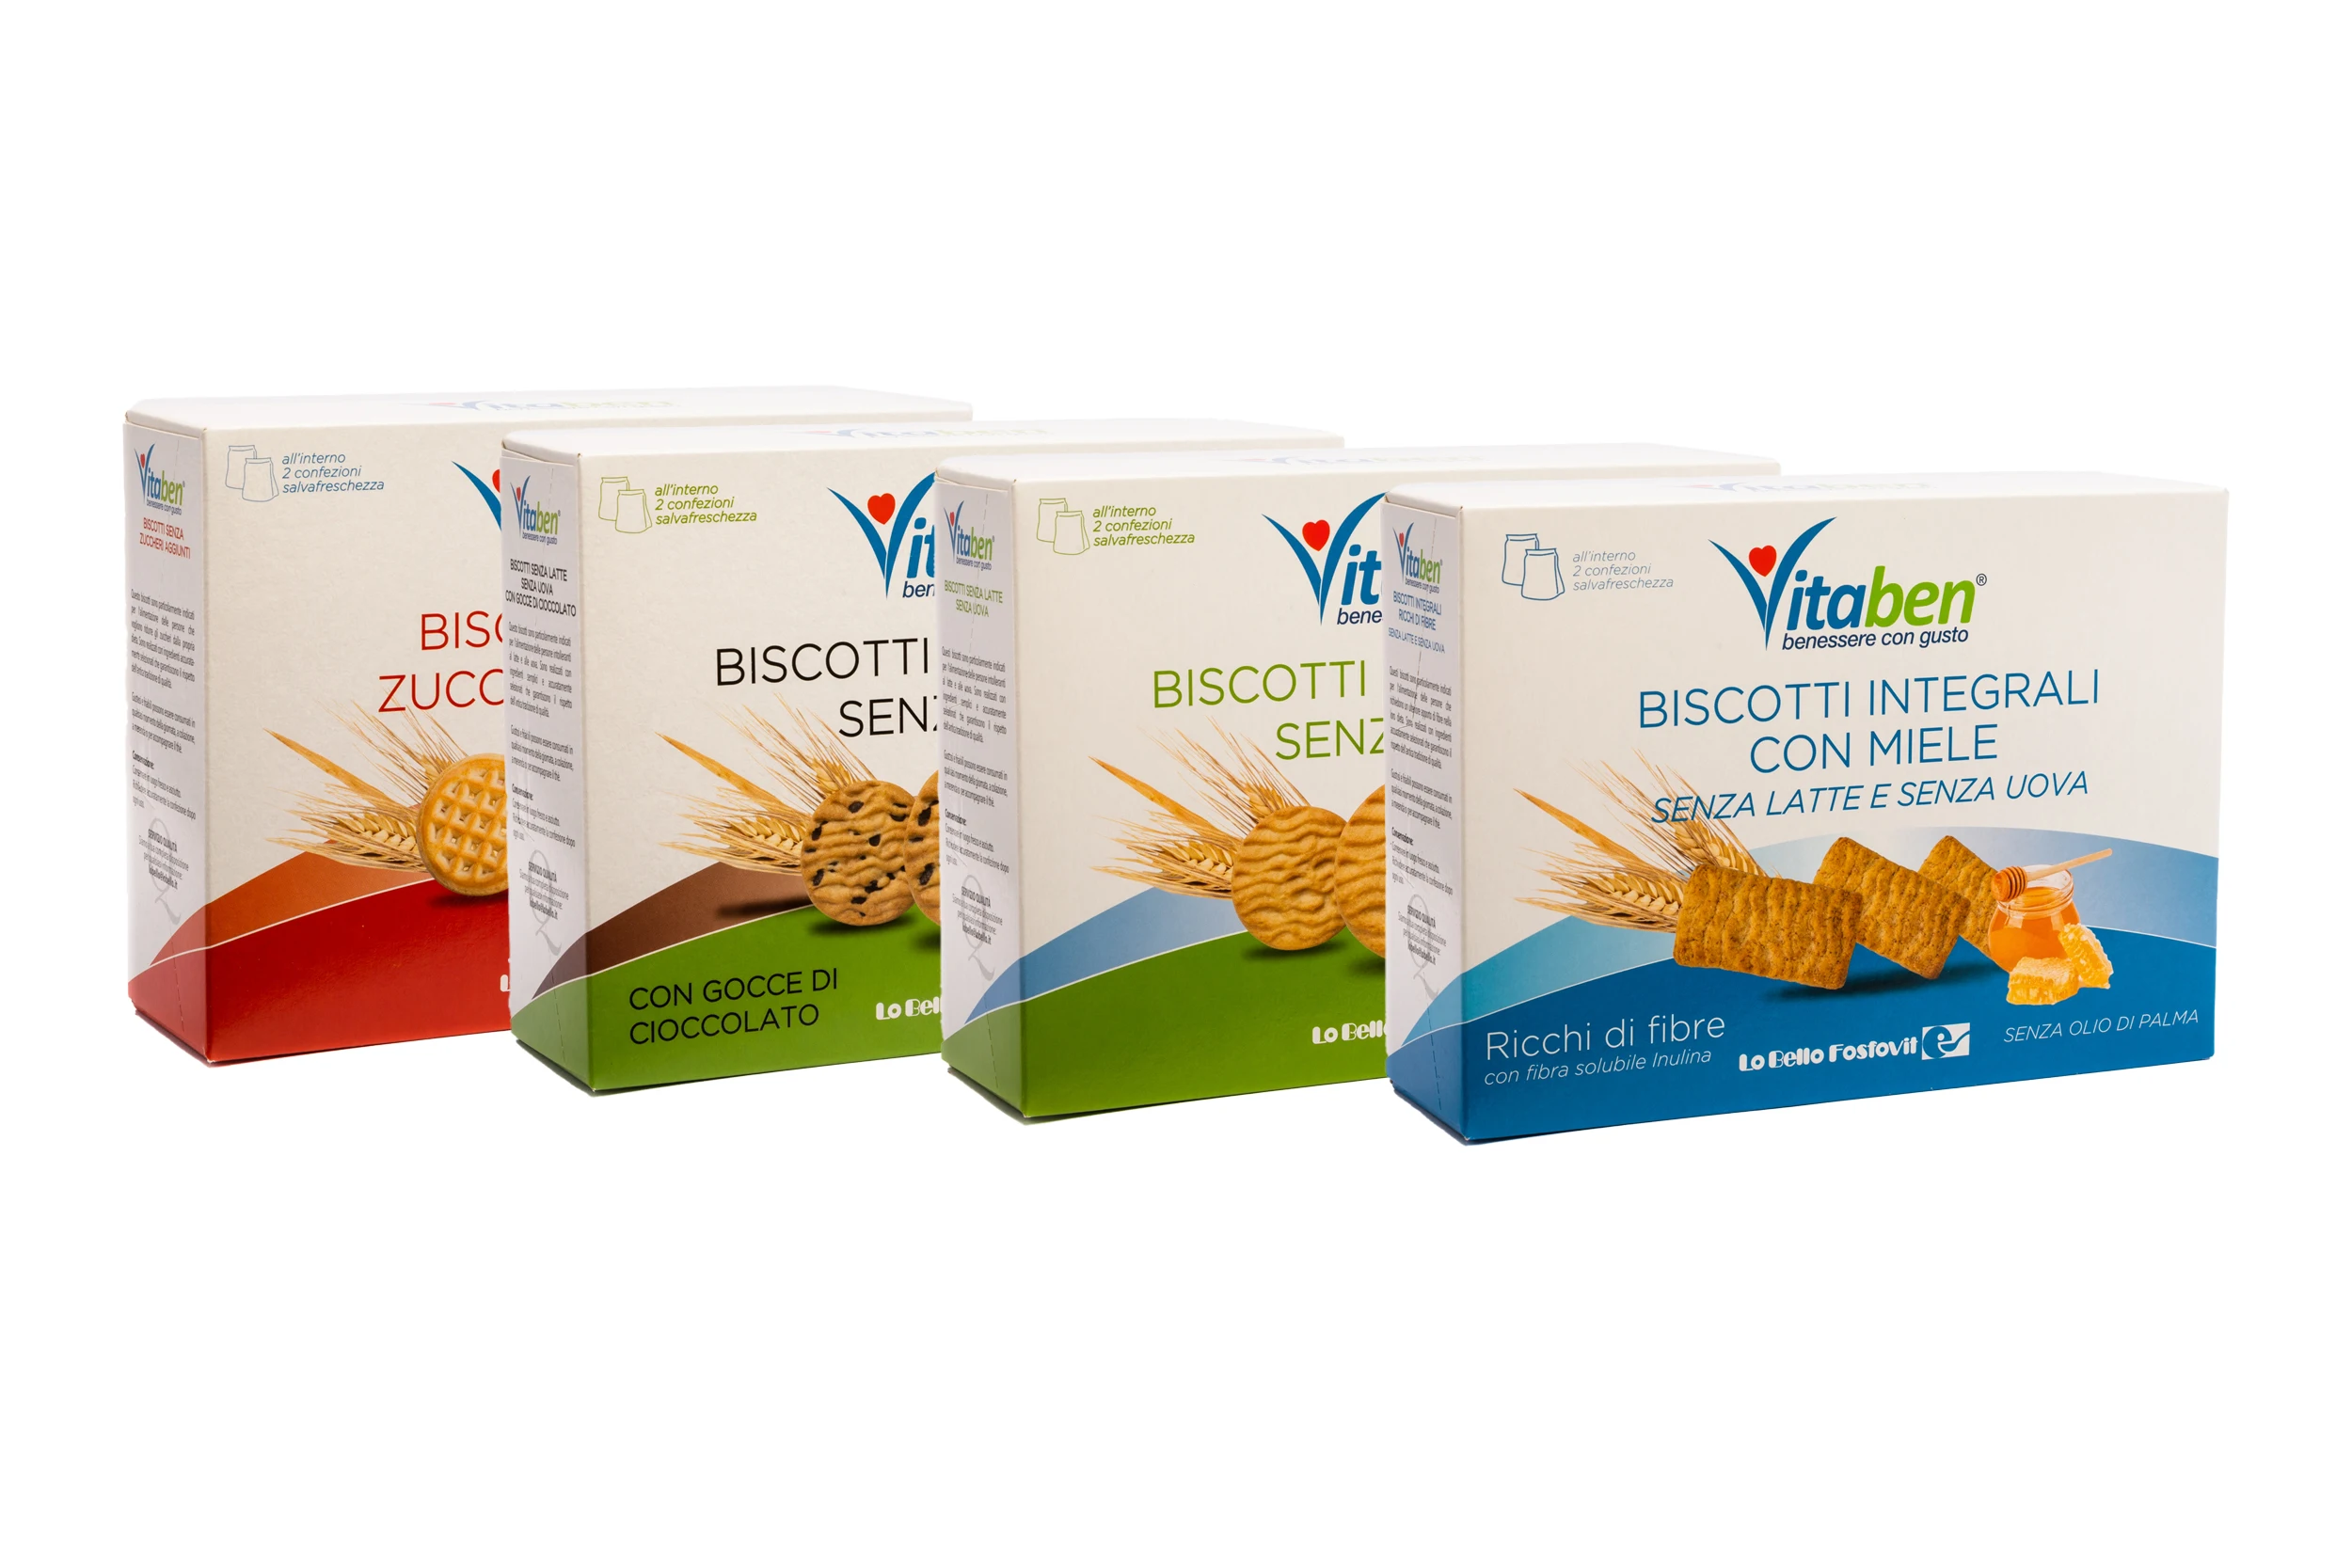 Top Selling Vitaben Biscuits Sugar Free 250g Made in Italy - Healty Food - Private Label - Different Flavour